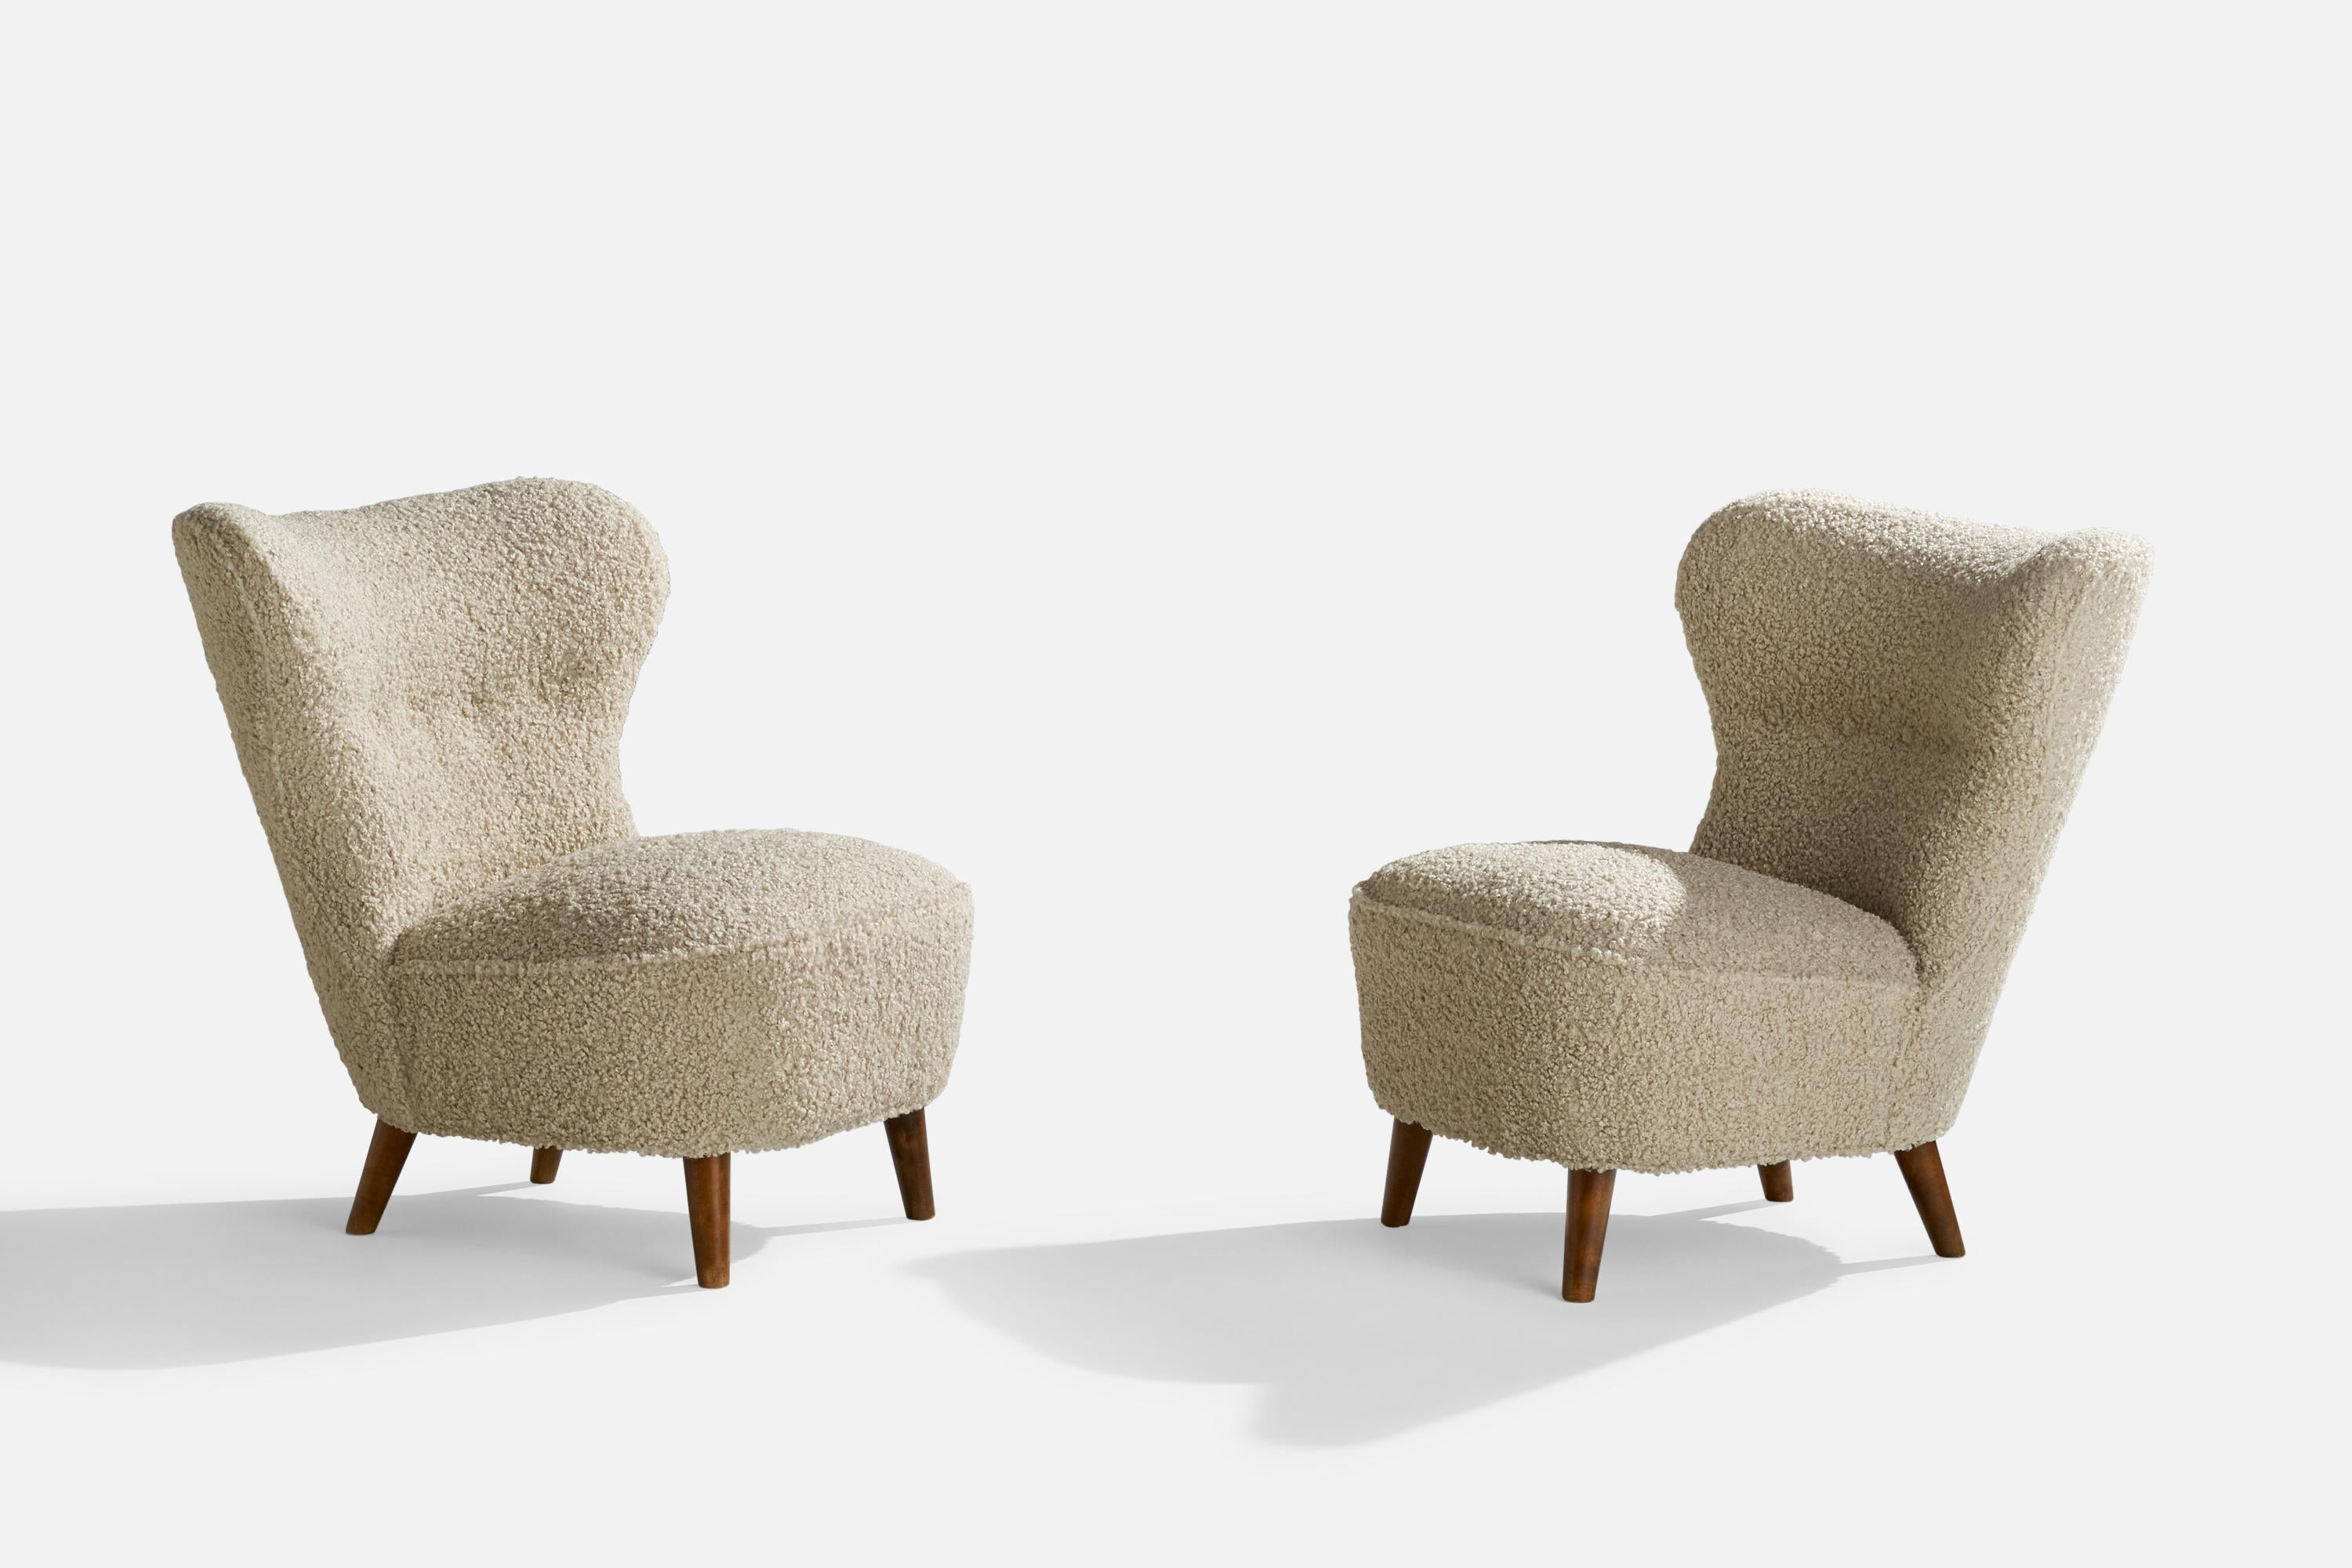 A pair of stained oak and white bouclé fabric slipper lounge chairs designed and produced in Sweden, 1940s.

Seat height 16”.